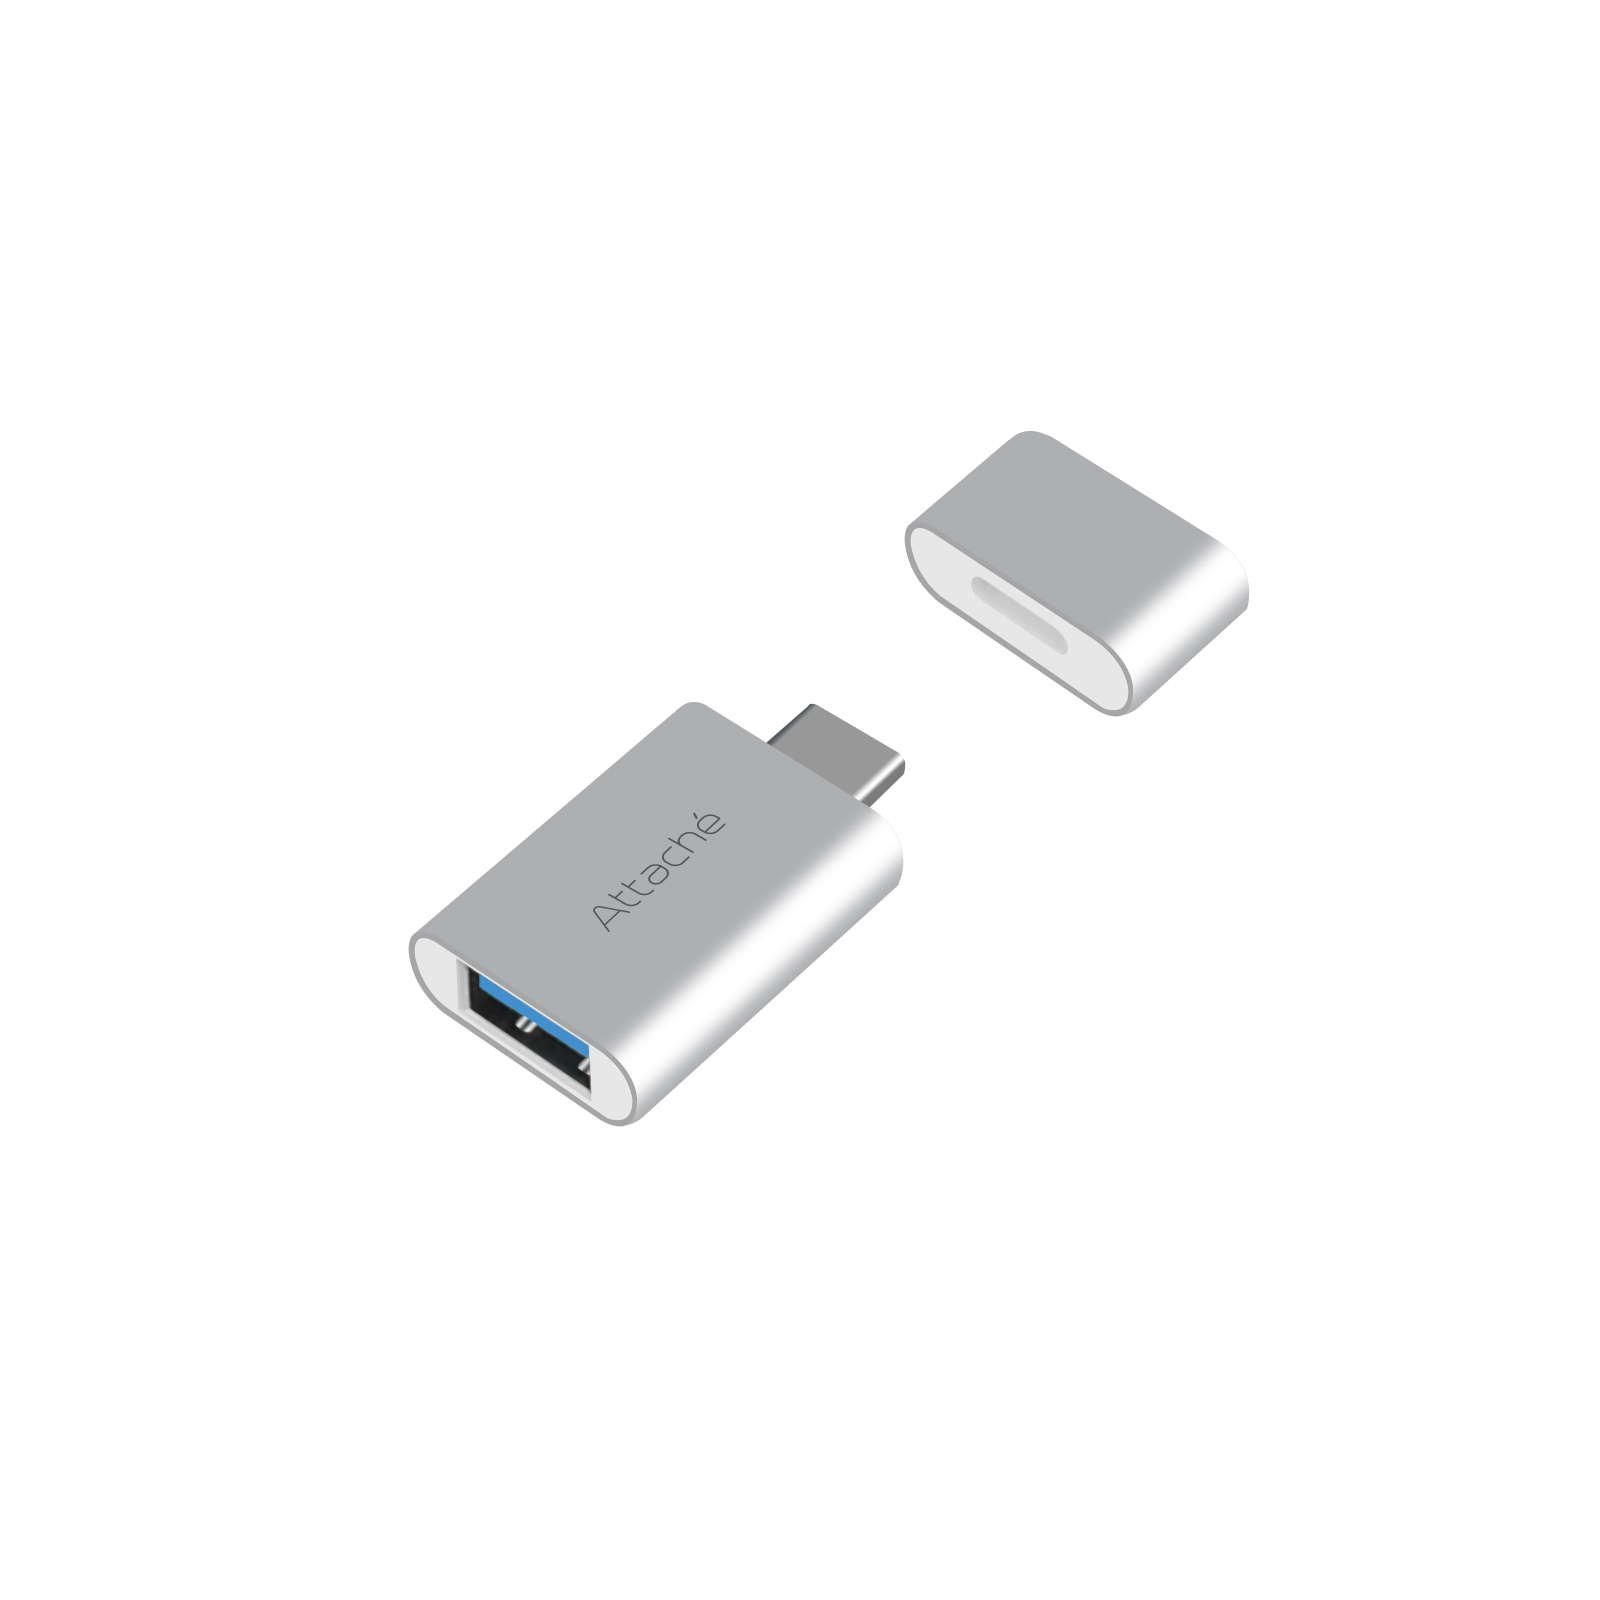 Adapters/MBEAT: mbeatÂ®, Attach, USB, Type-C, To, USB, 3.1, Adapter, -, Type, C, Male, to, USB, 3.1, A, Female, -, Support, Apple, MacBook, Google, Chromebo, 